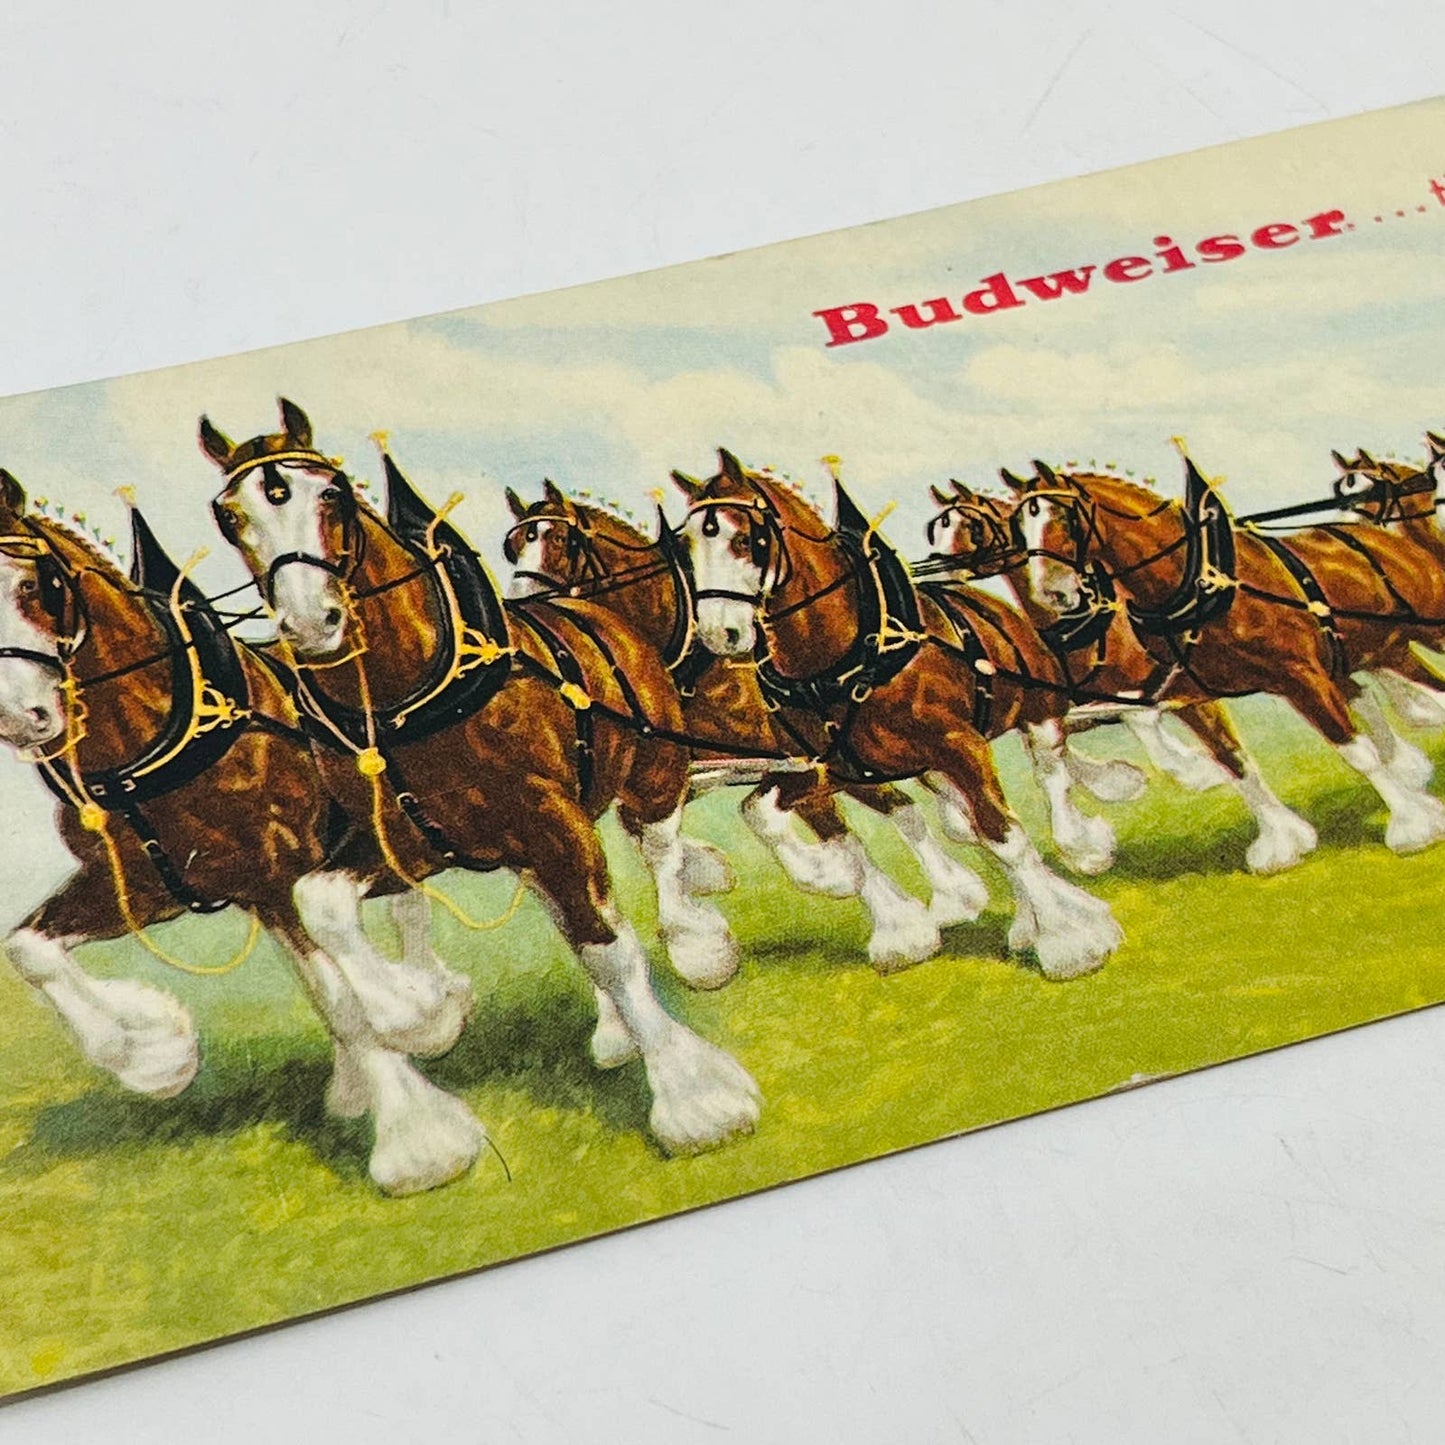 1940s DOUBLE FOLD ADVERTISING POSTCARD BUDWEISER CLYDESDALE HORSES MICHELOB C7